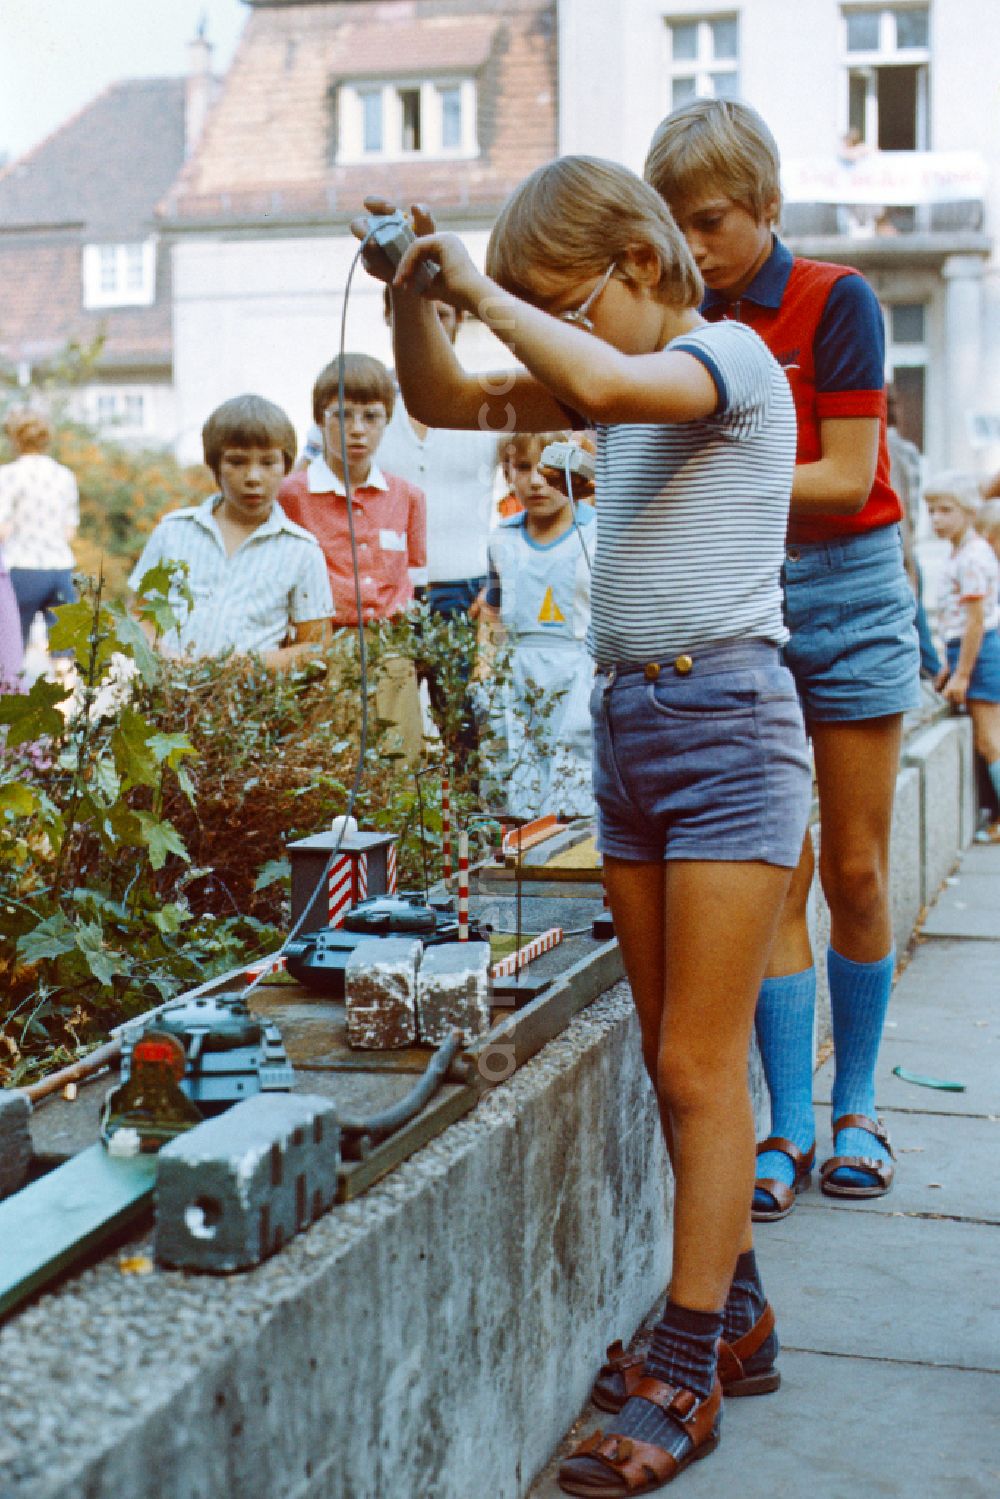 GDR photo archive: Berlin - Boy plays with a toy tank at the Pankefest in East Berlin on the territory of the former GDR, German Democratic Republic